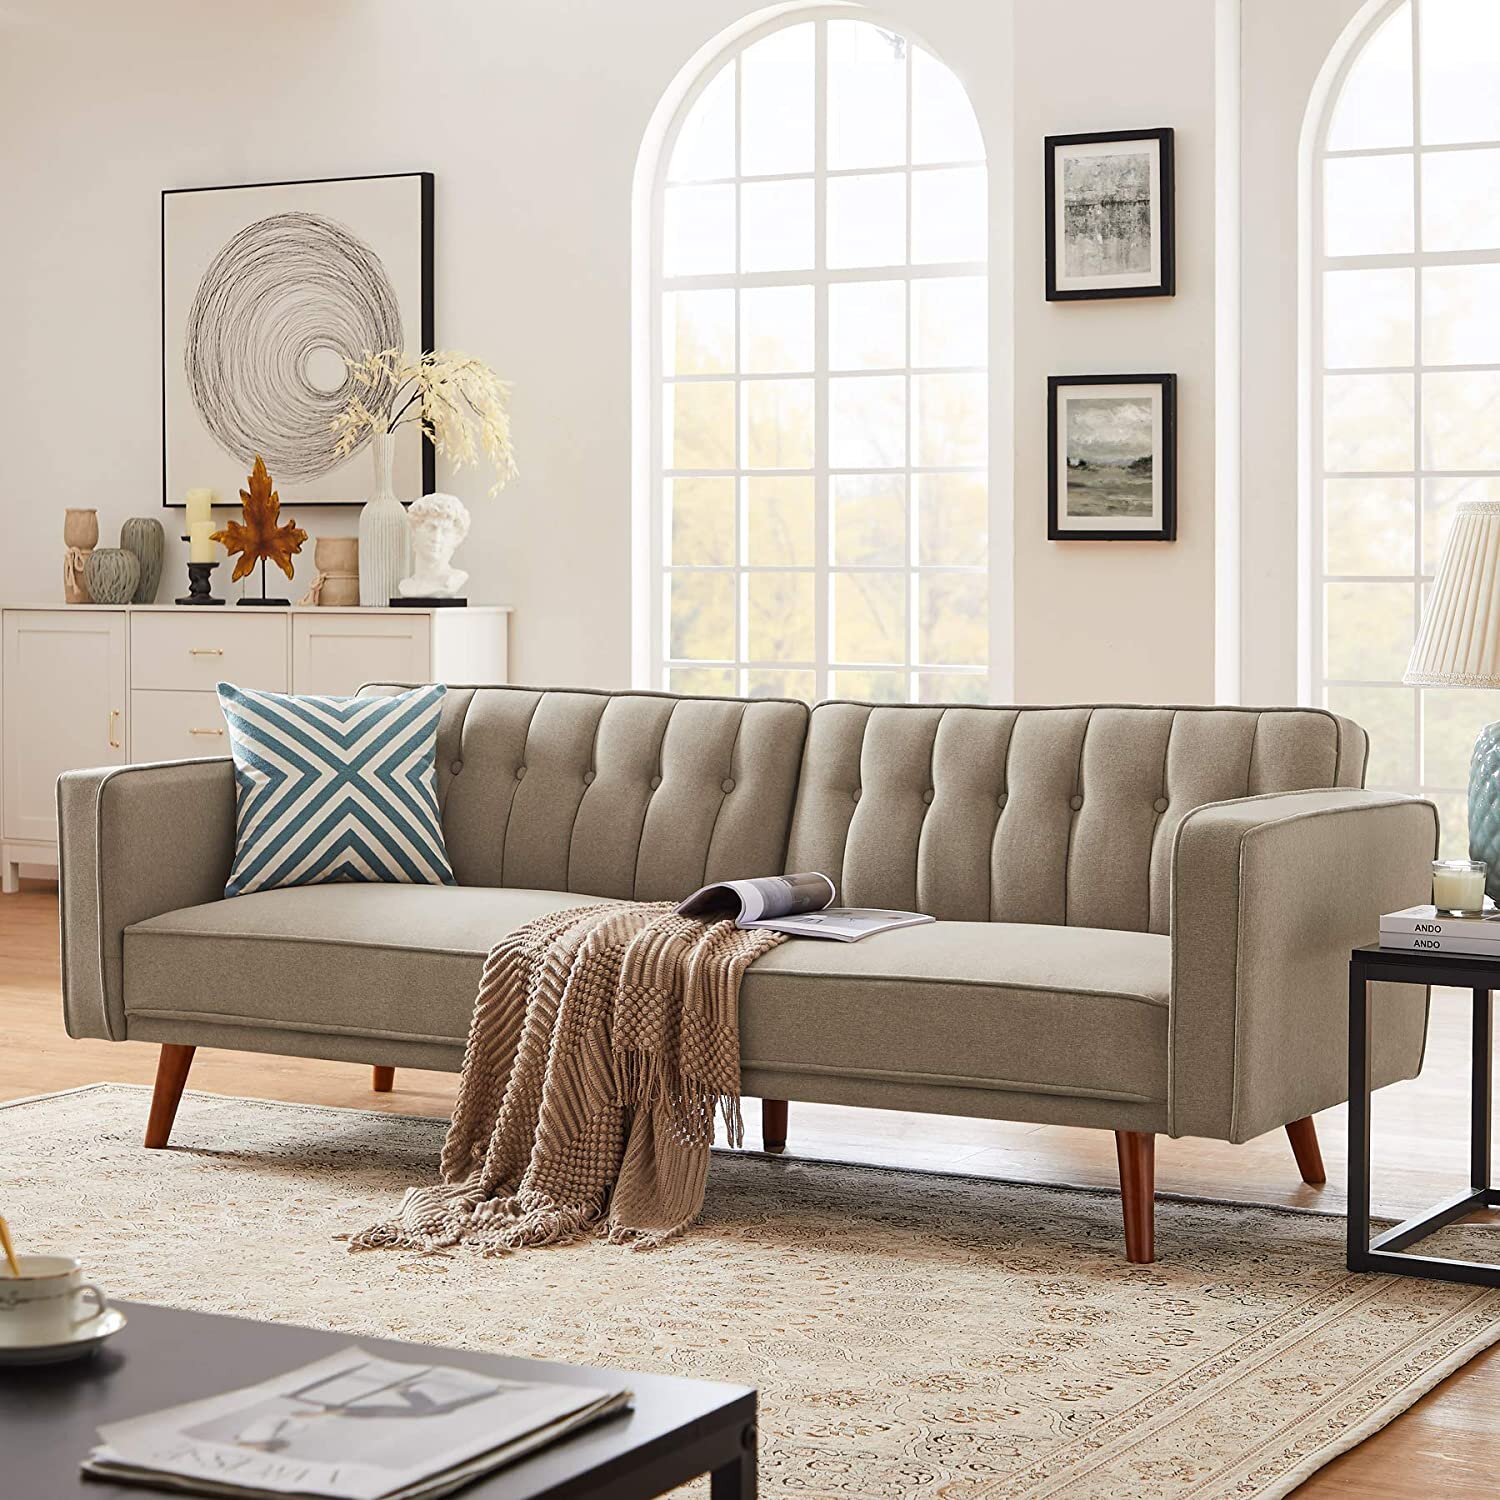 25 Best Sofa Trends In 2021 To Watch Out For - Décor Aid